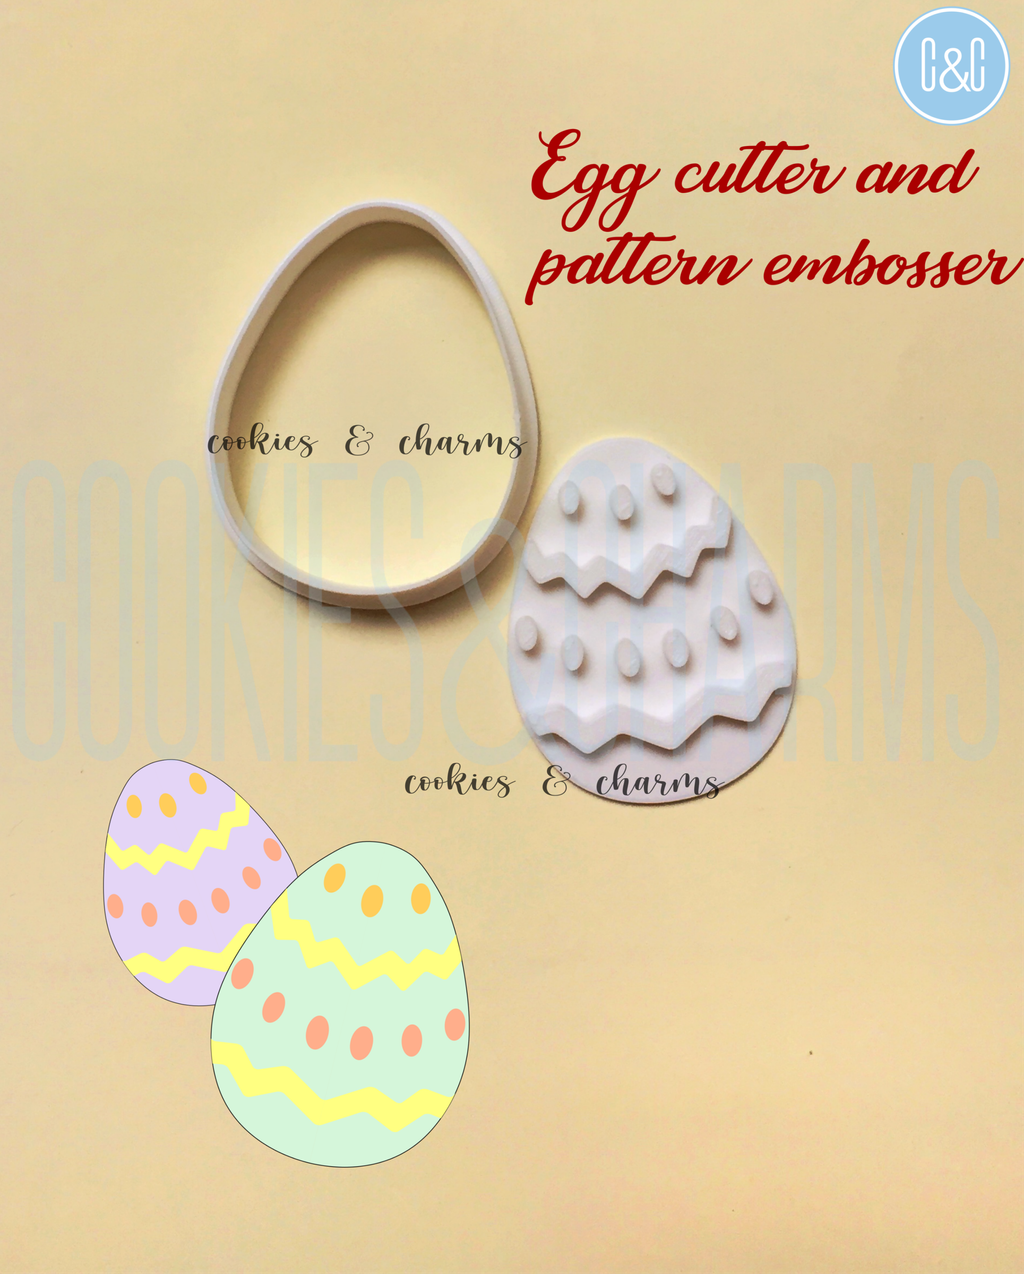 Egg Shape Cookie Cutter and Pattern Embosser Set from Cookies and charms